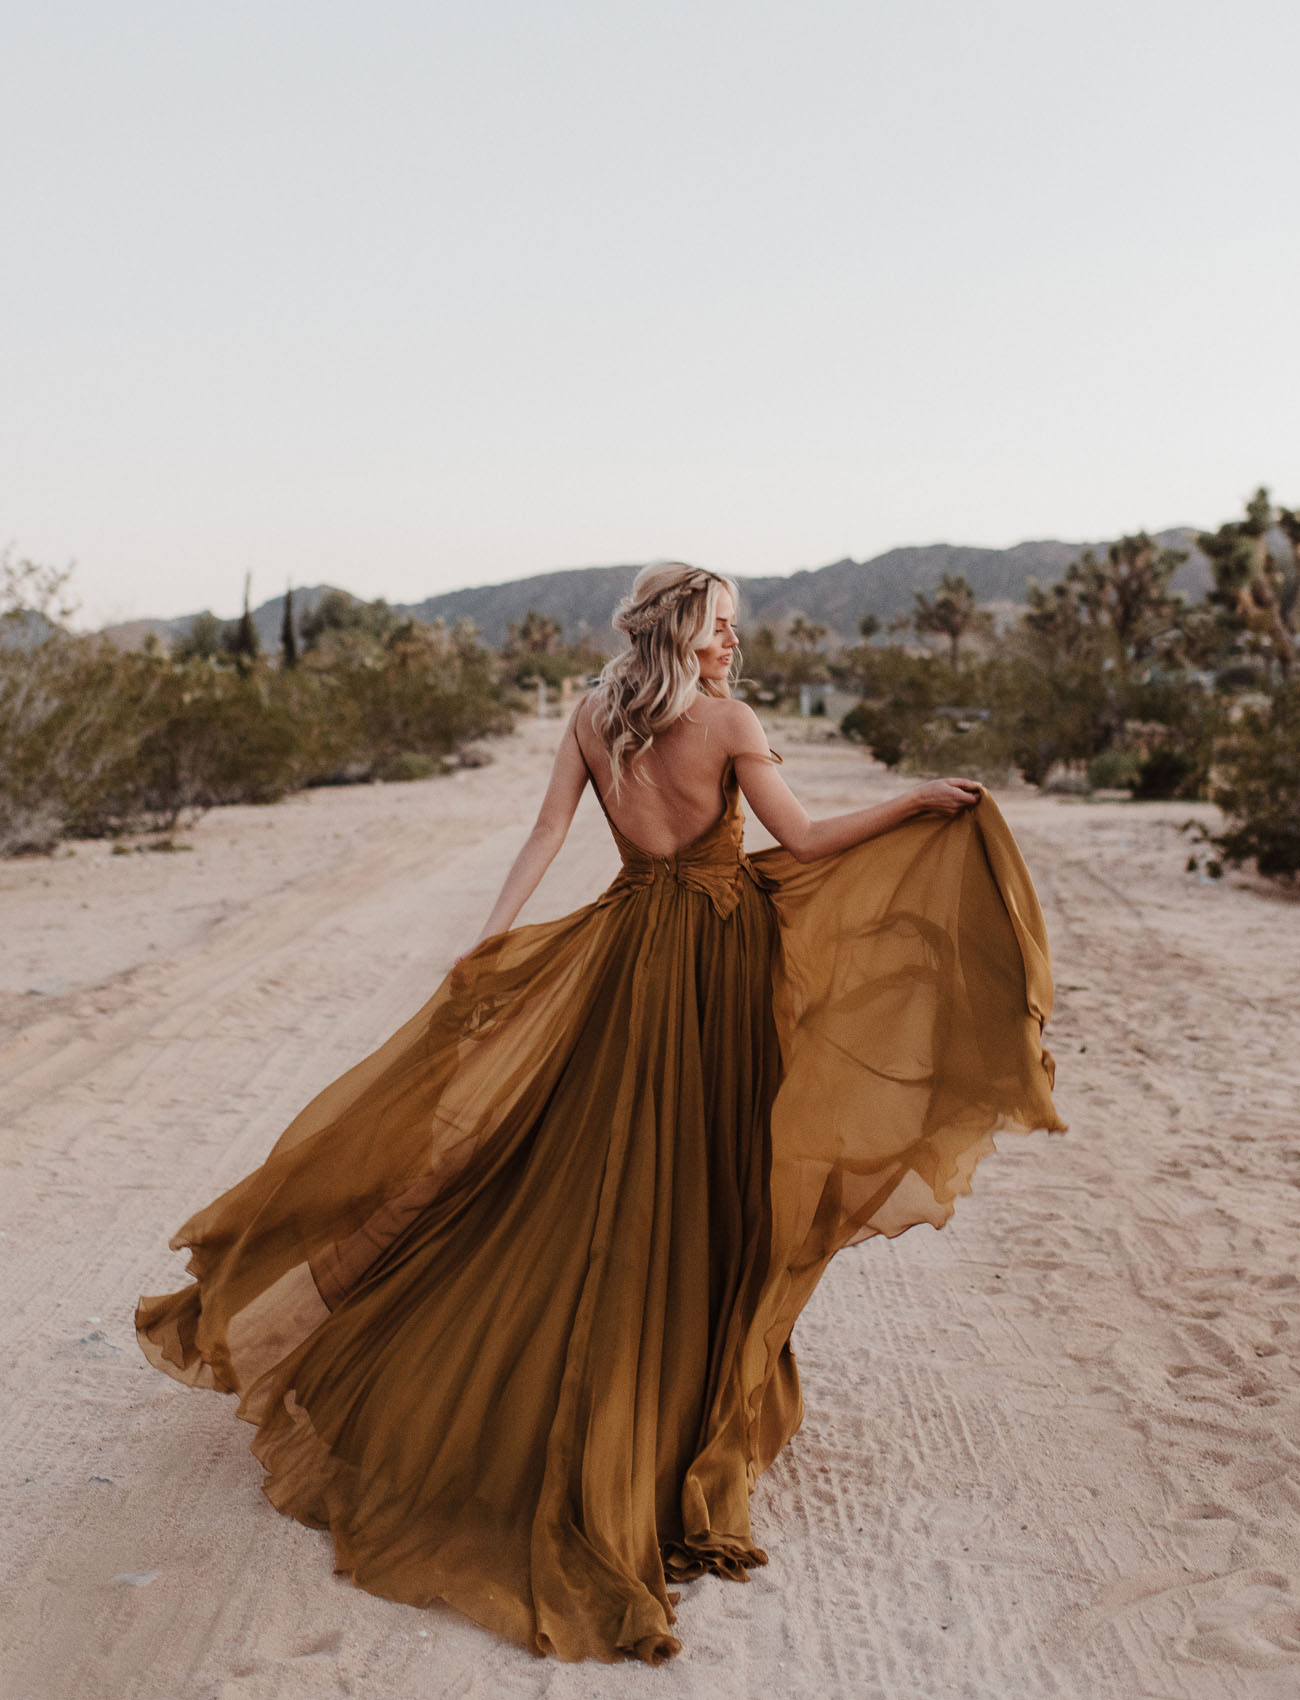 Feel the spirit of desert with this gorgeous wedding shoot